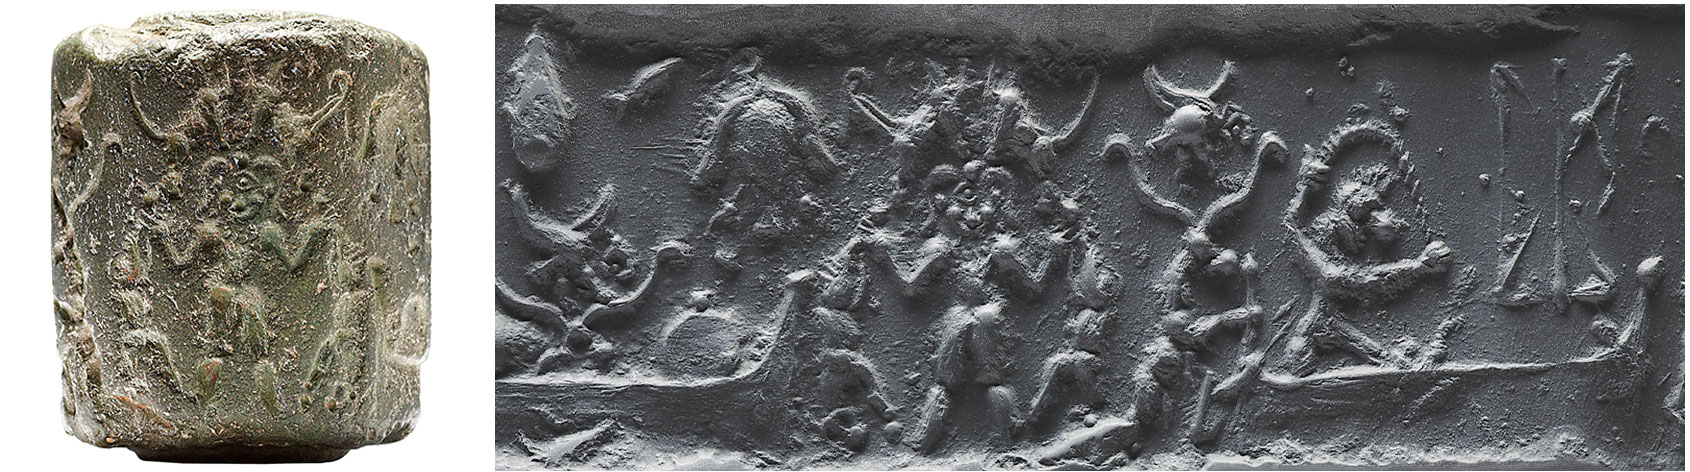 Dated between 2500 to 2340 BCE, artifacts discovered at Ur in the grave of Queen Puabi included what proved to be a royal headdress with flowers and leaves of gold. Found alongside it, visible to its left, was one of three cylinder seals that included the seal lower left. Made of lapis lazuli, it depicts two banquet scenes attended only by women. 